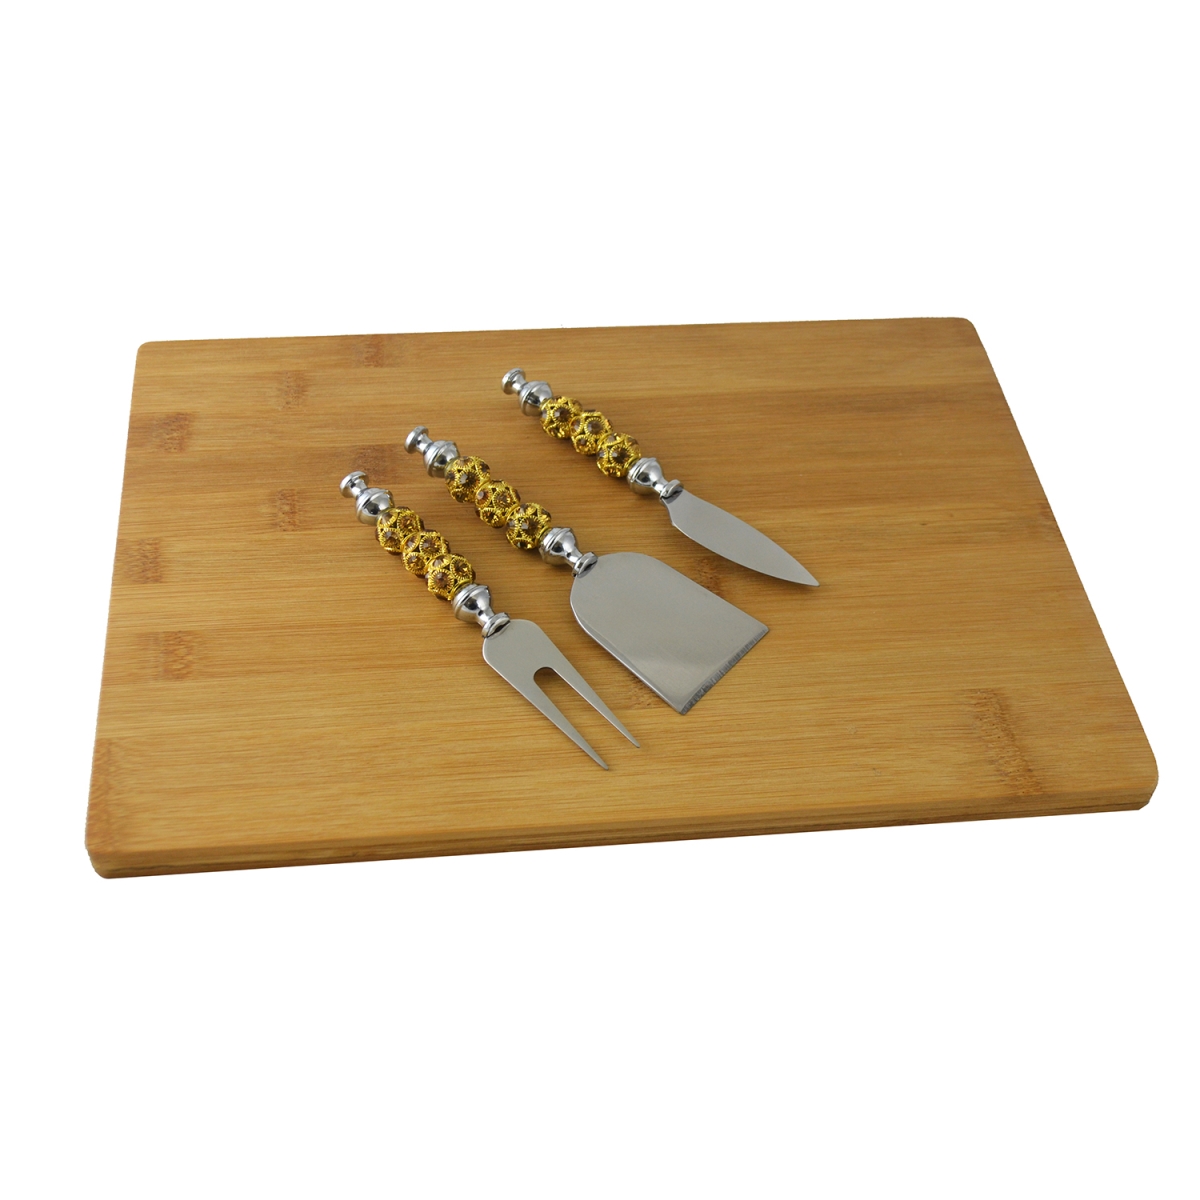 Picture of Three Star SX3110 13.25 x 9.5 in. Amber & Gold Cheese Board With Utensil Set - 3 Piece